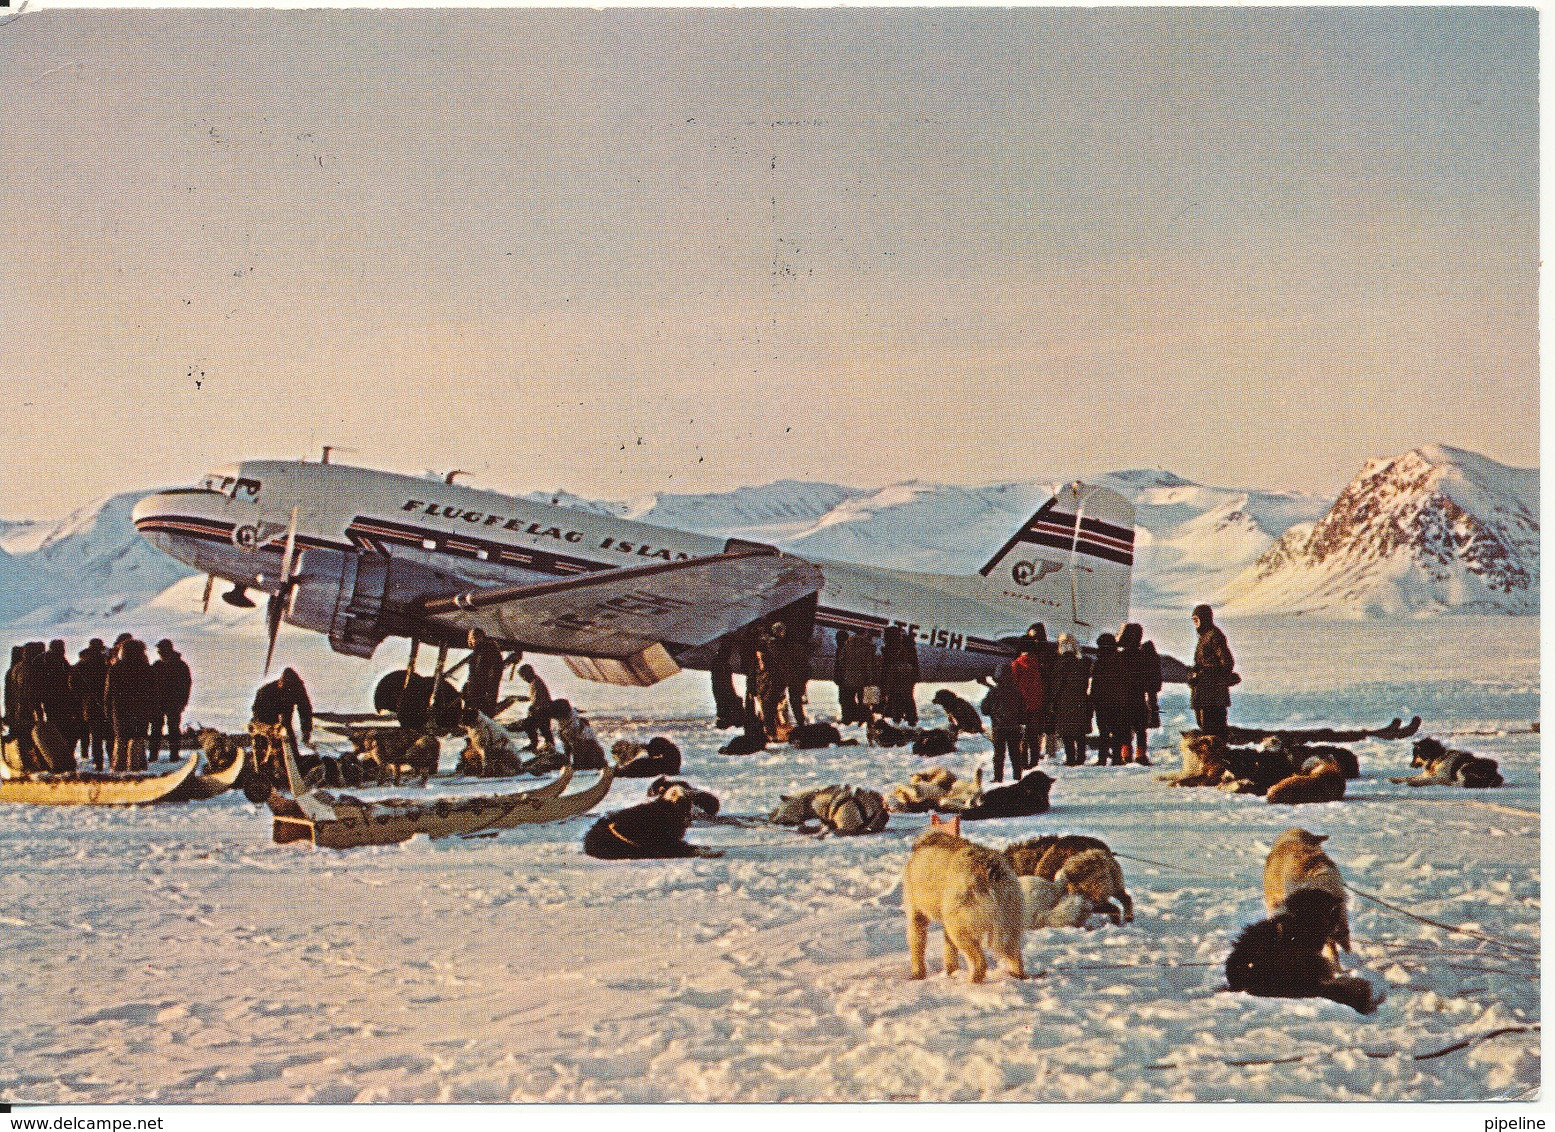 Greenland Postcard With Christmas Seal And Special Postmark Godthab 19-11-1979 (Aircraft On Skis Scoresbysund - Greenland